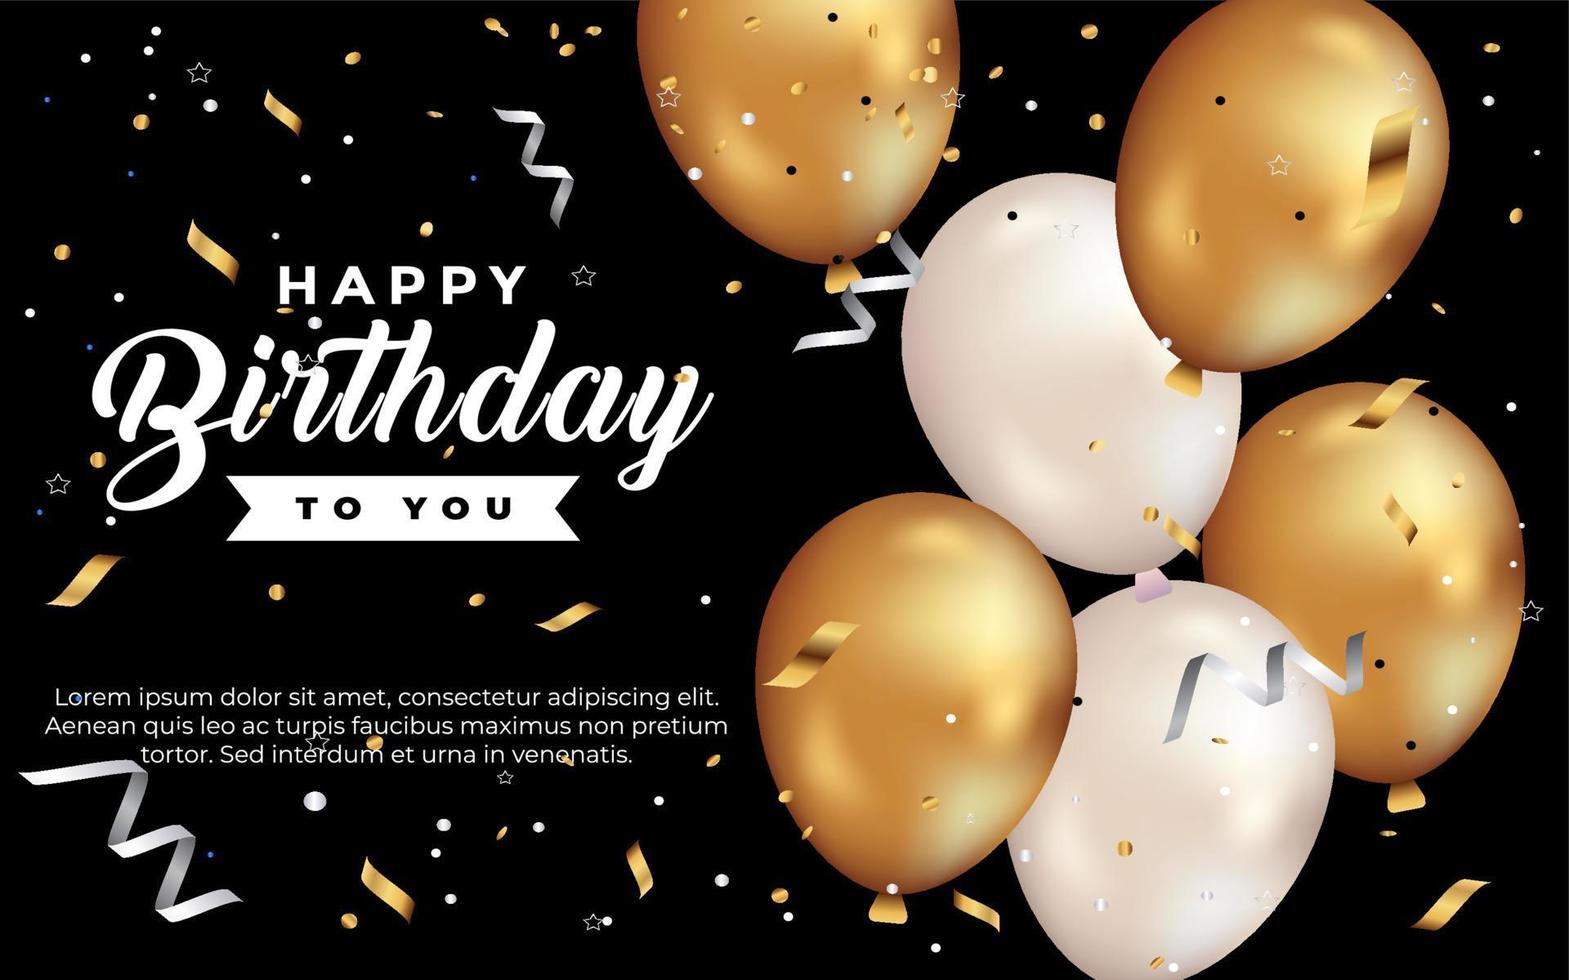 happy birthday greeting template with balloon vector